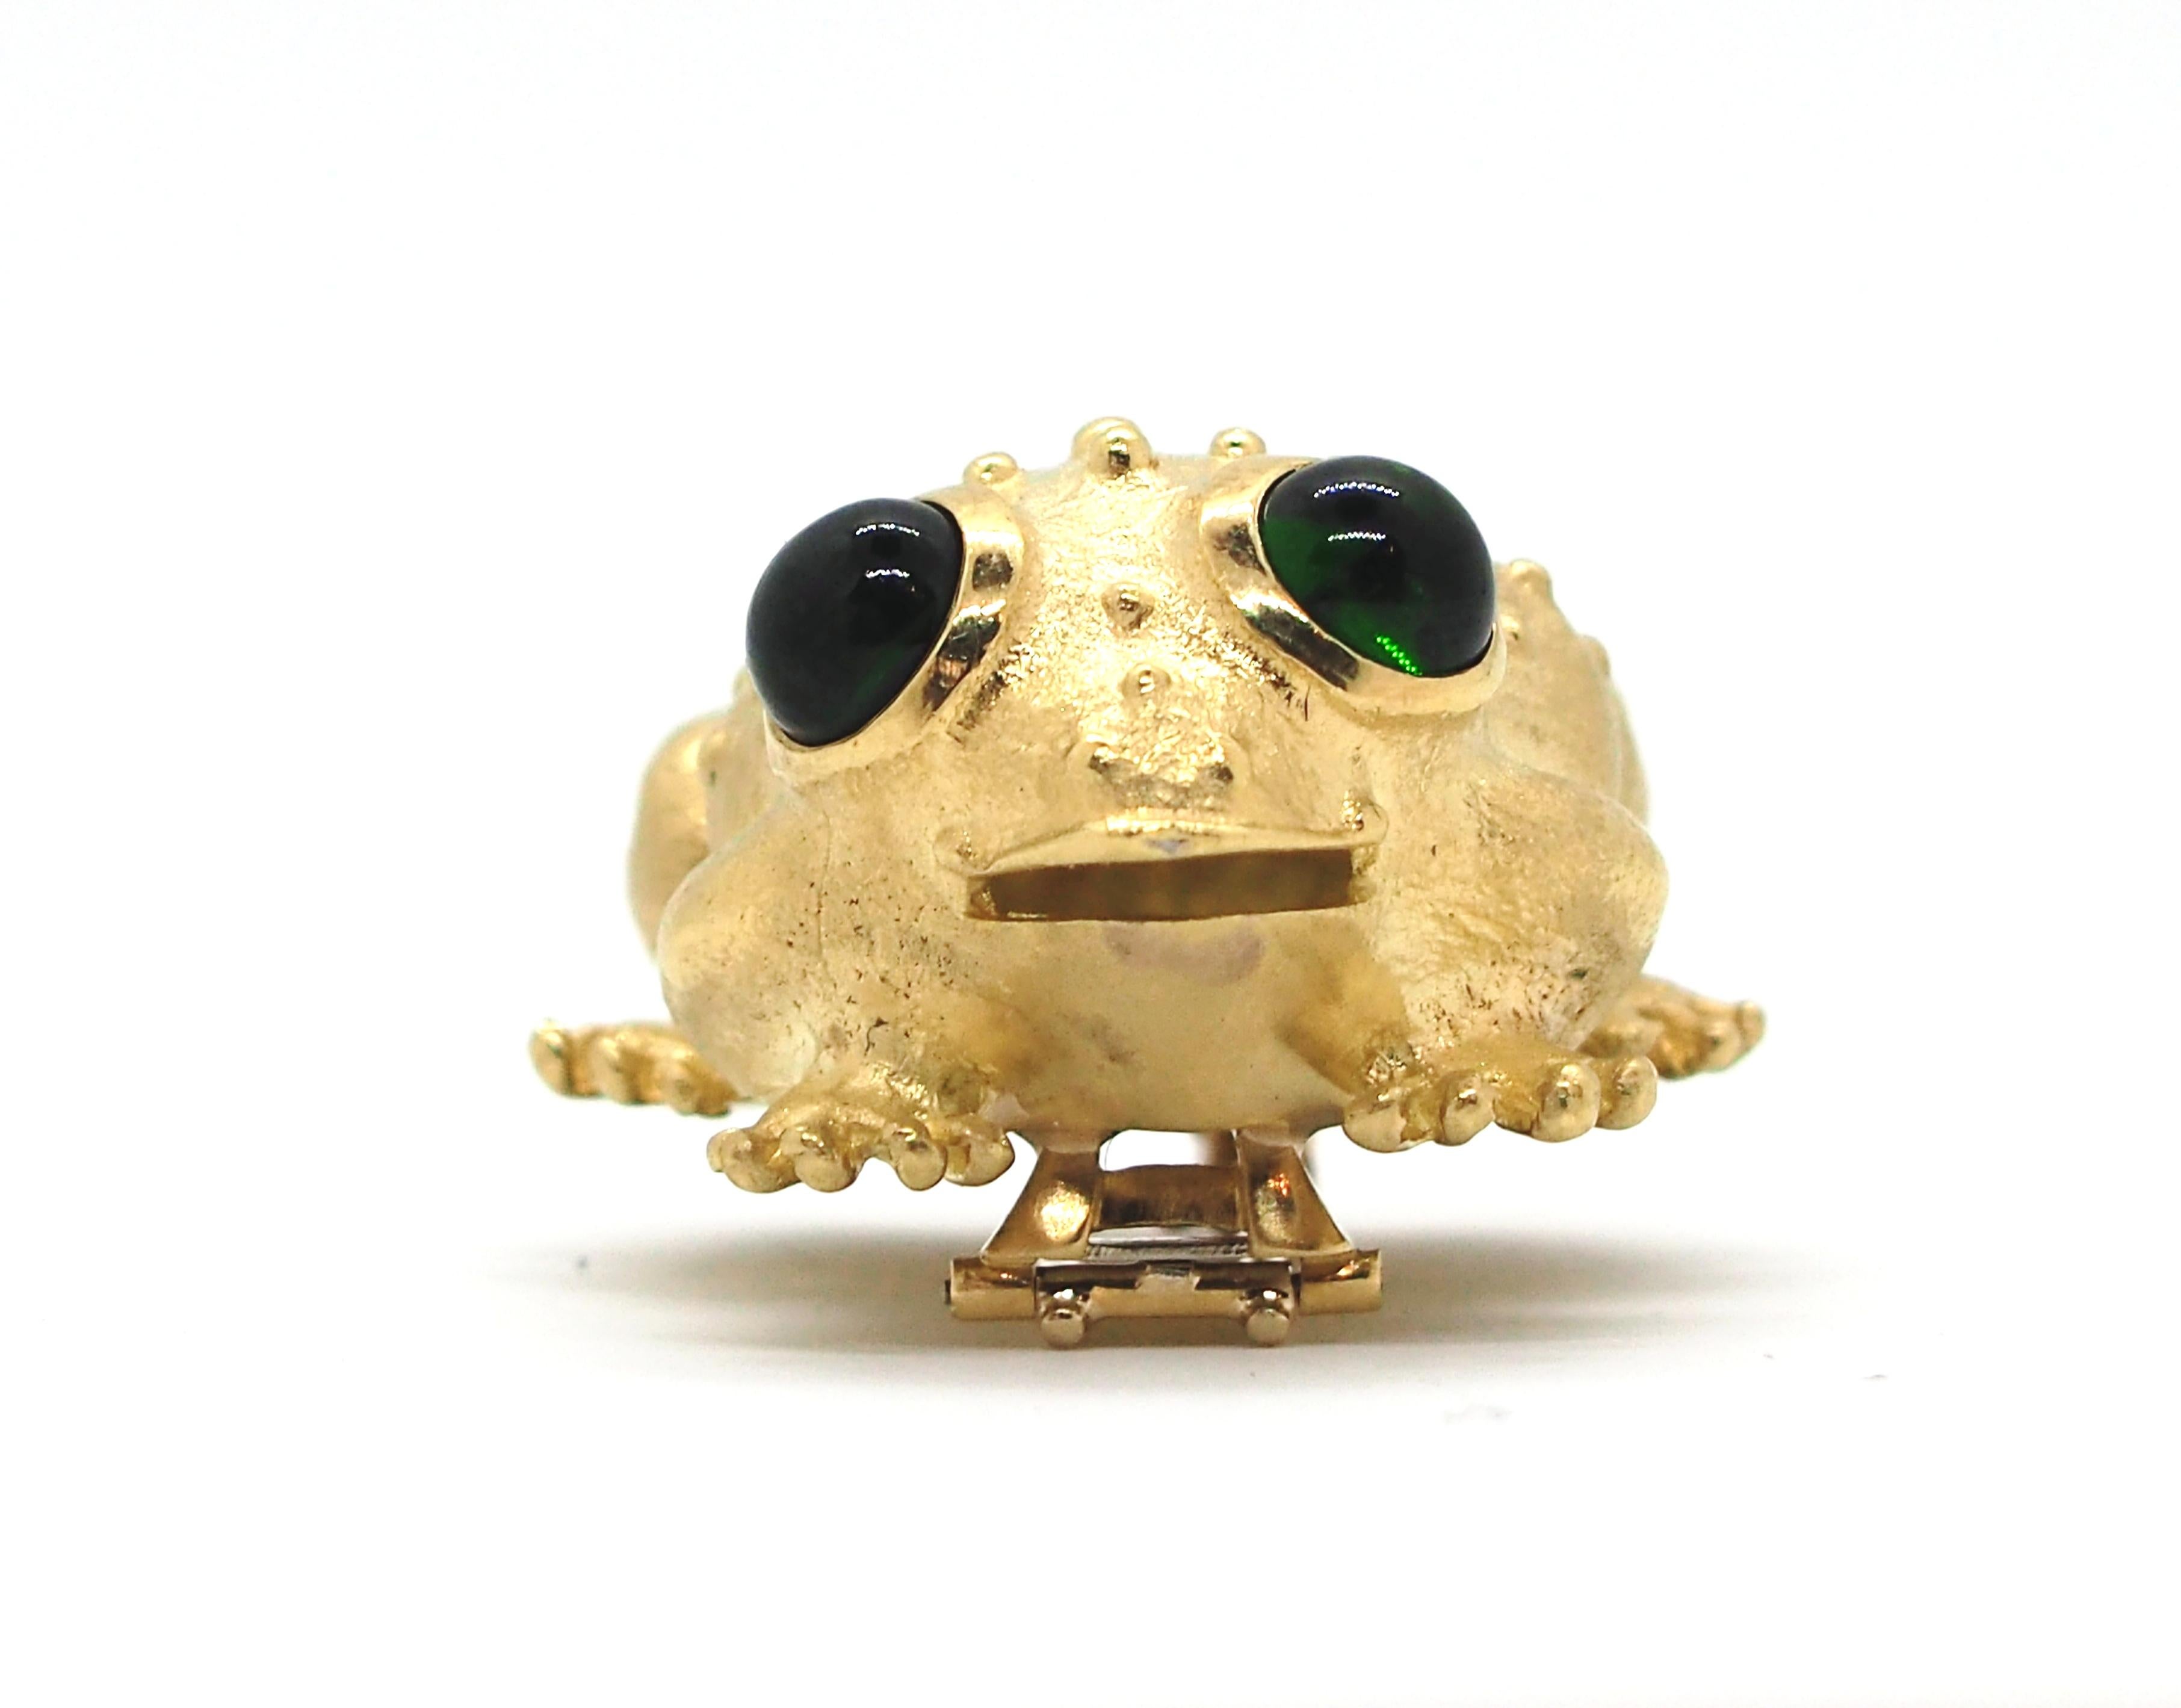 This incredible very rare vintage object crafted into the 18 K yellow gold, which will make you  smile when will take a look on this cutie. This vintage and original sujet.

The total weight: 25 grams
3.5 cm * 2.7 cm

The brooch comes with our